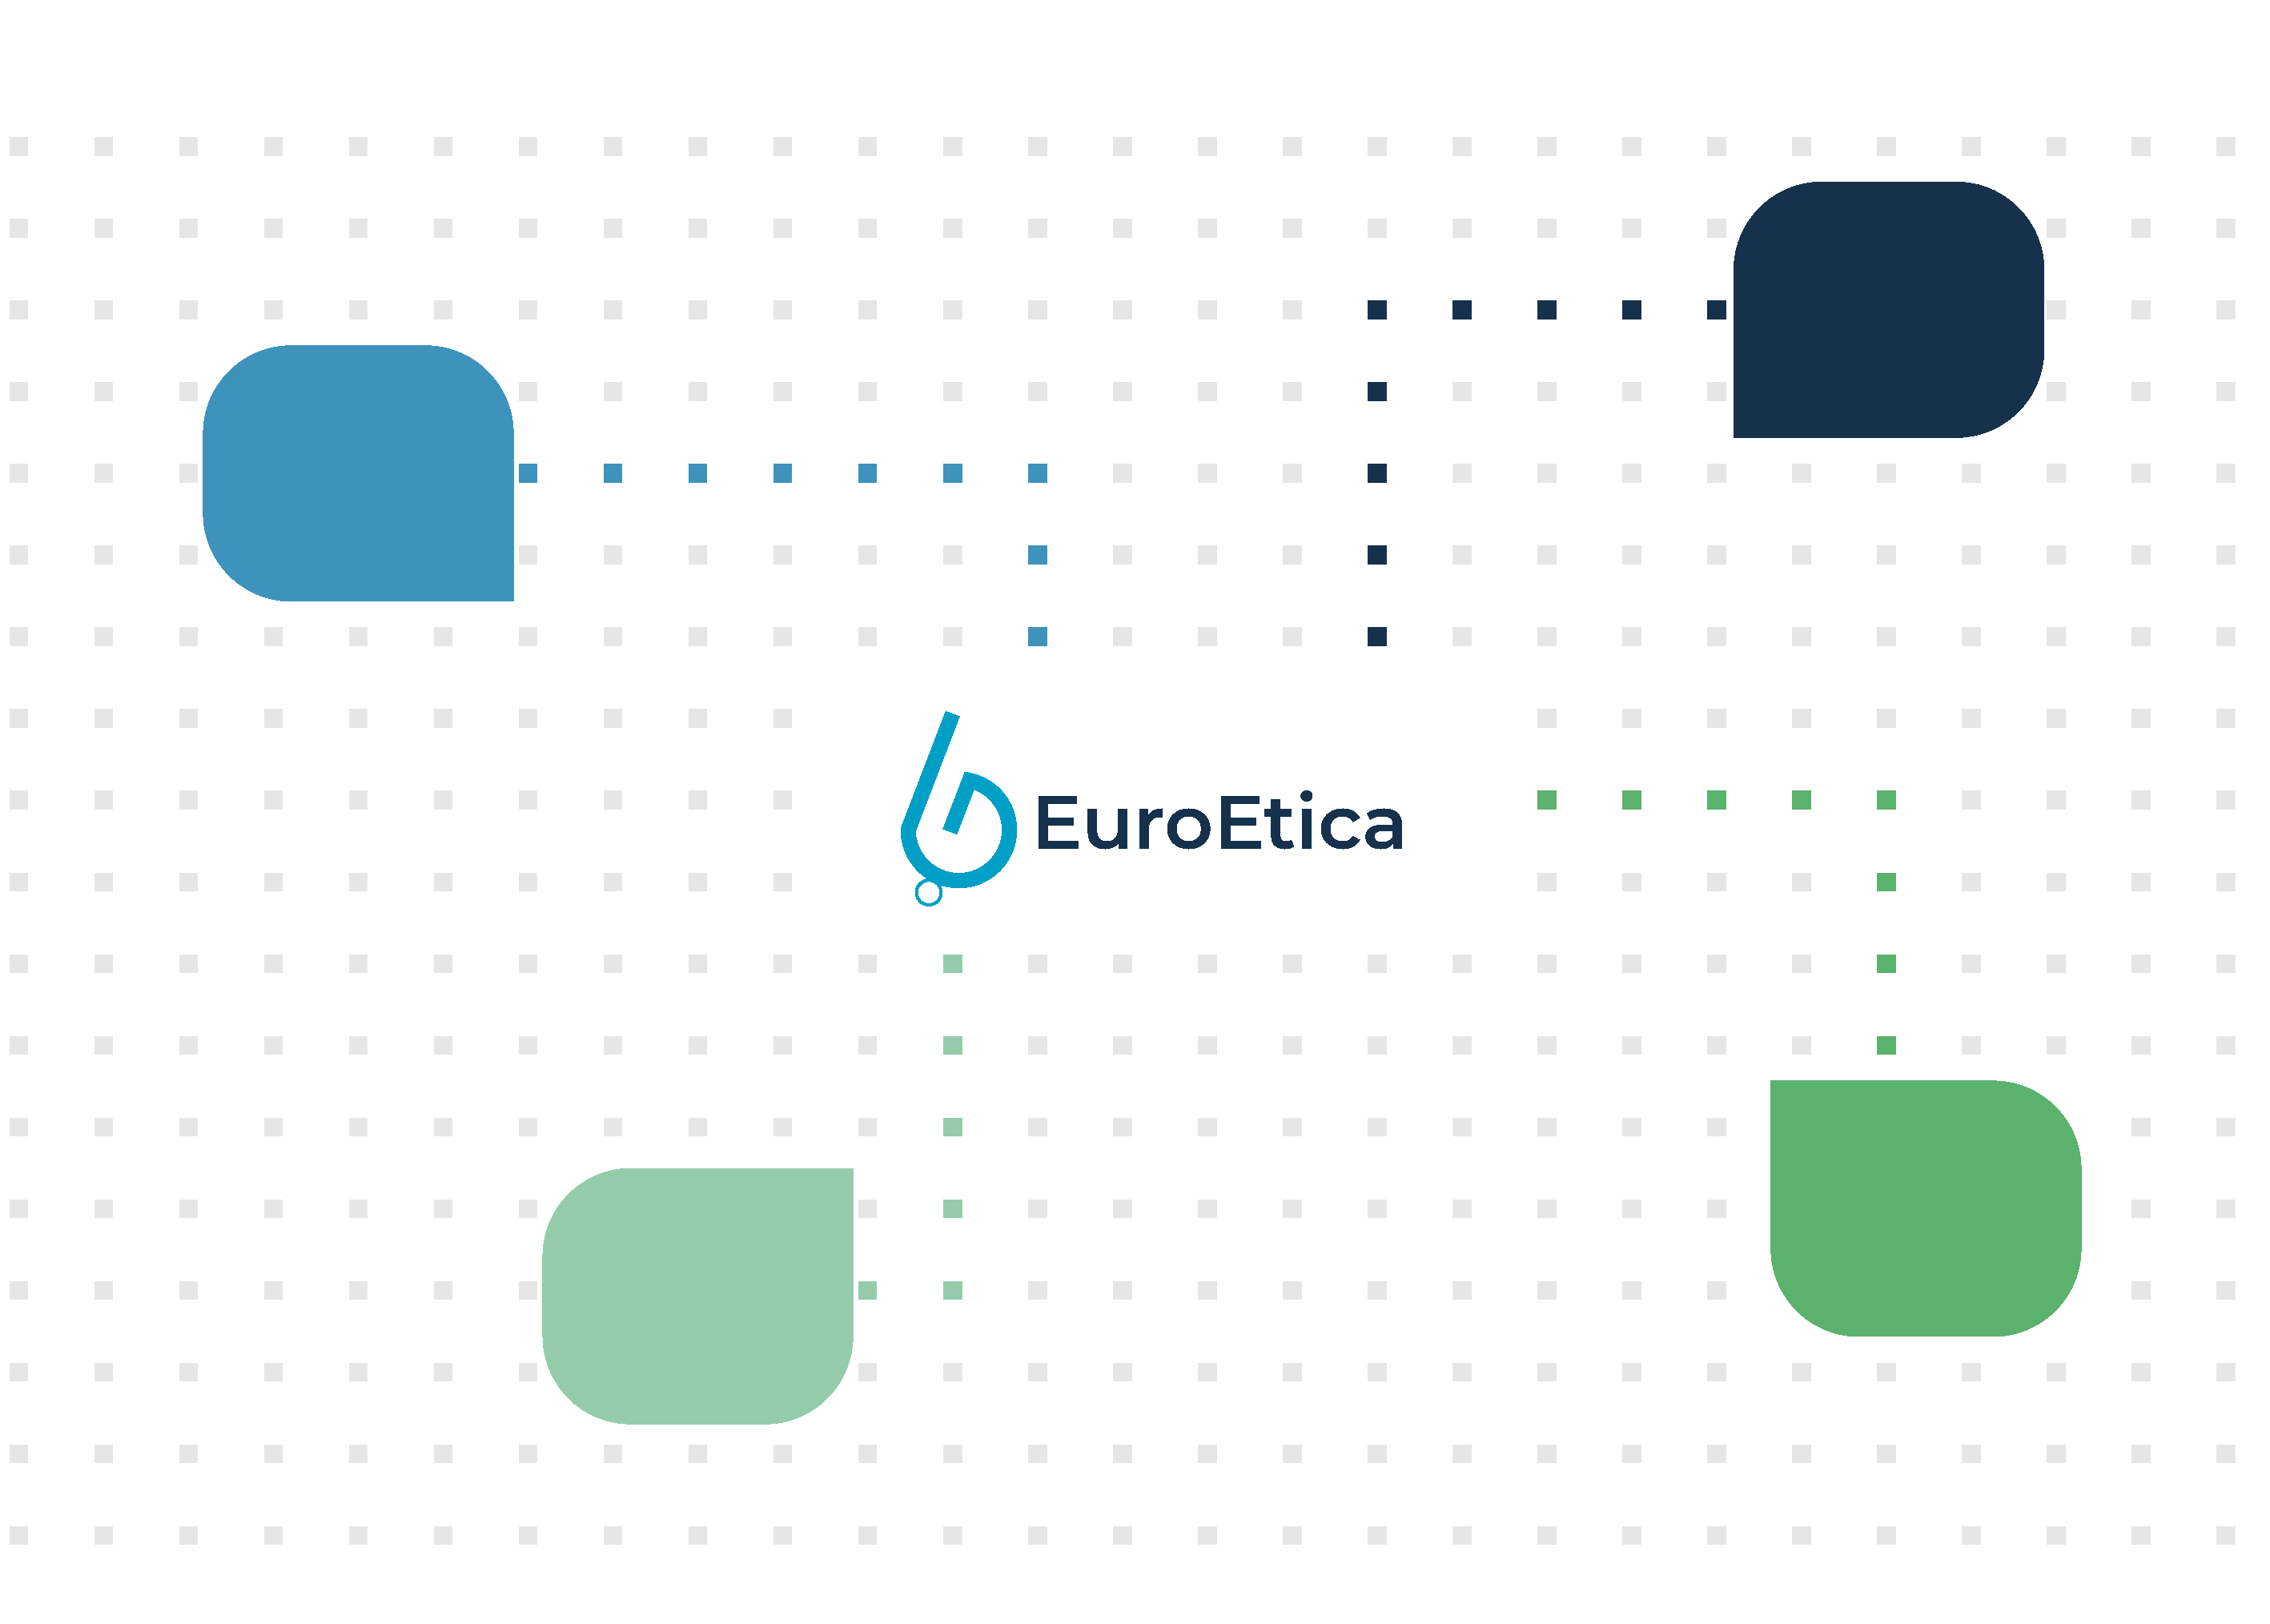 Start your whistleblowing journey with EuroEtica from any device, at any time.